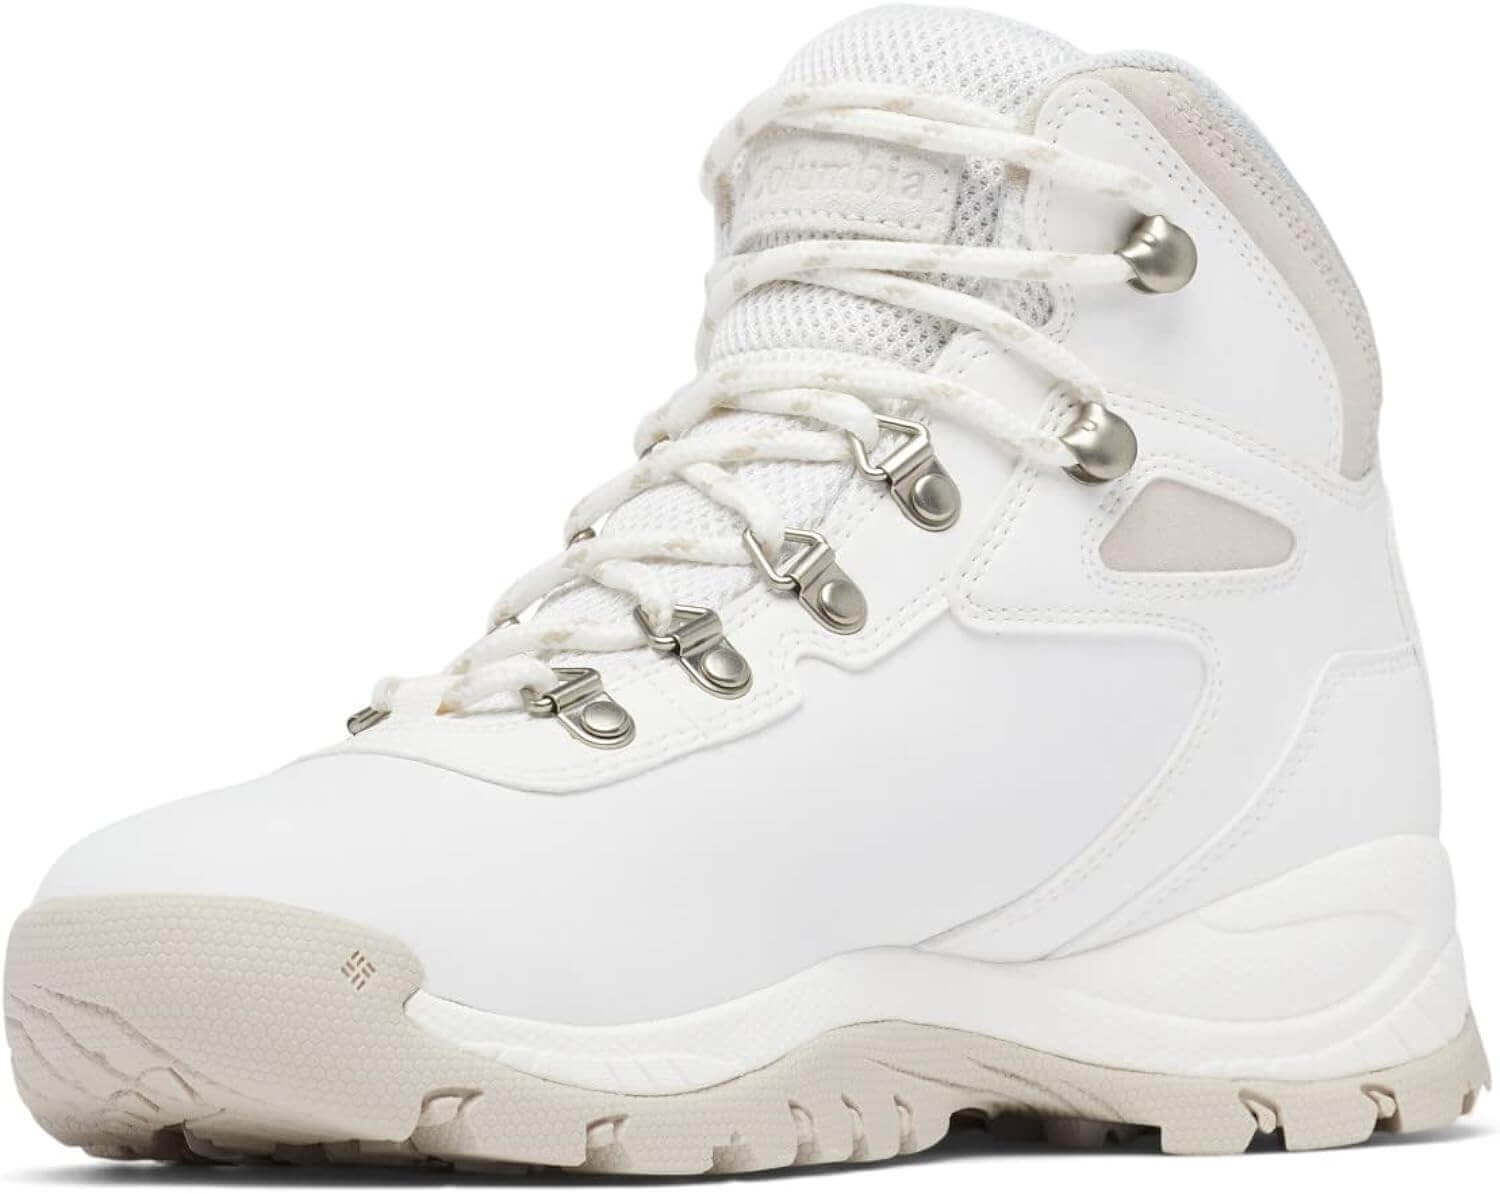 Shop The Latest >Columbia Women's Newton Ridge Waterproof Hiking Boot > *Only $135.00*> From The Top Brand > *Columbial* > Shop Now and Get Free Shipping On Orders Over $45.00 >*Shop Earth Foot*